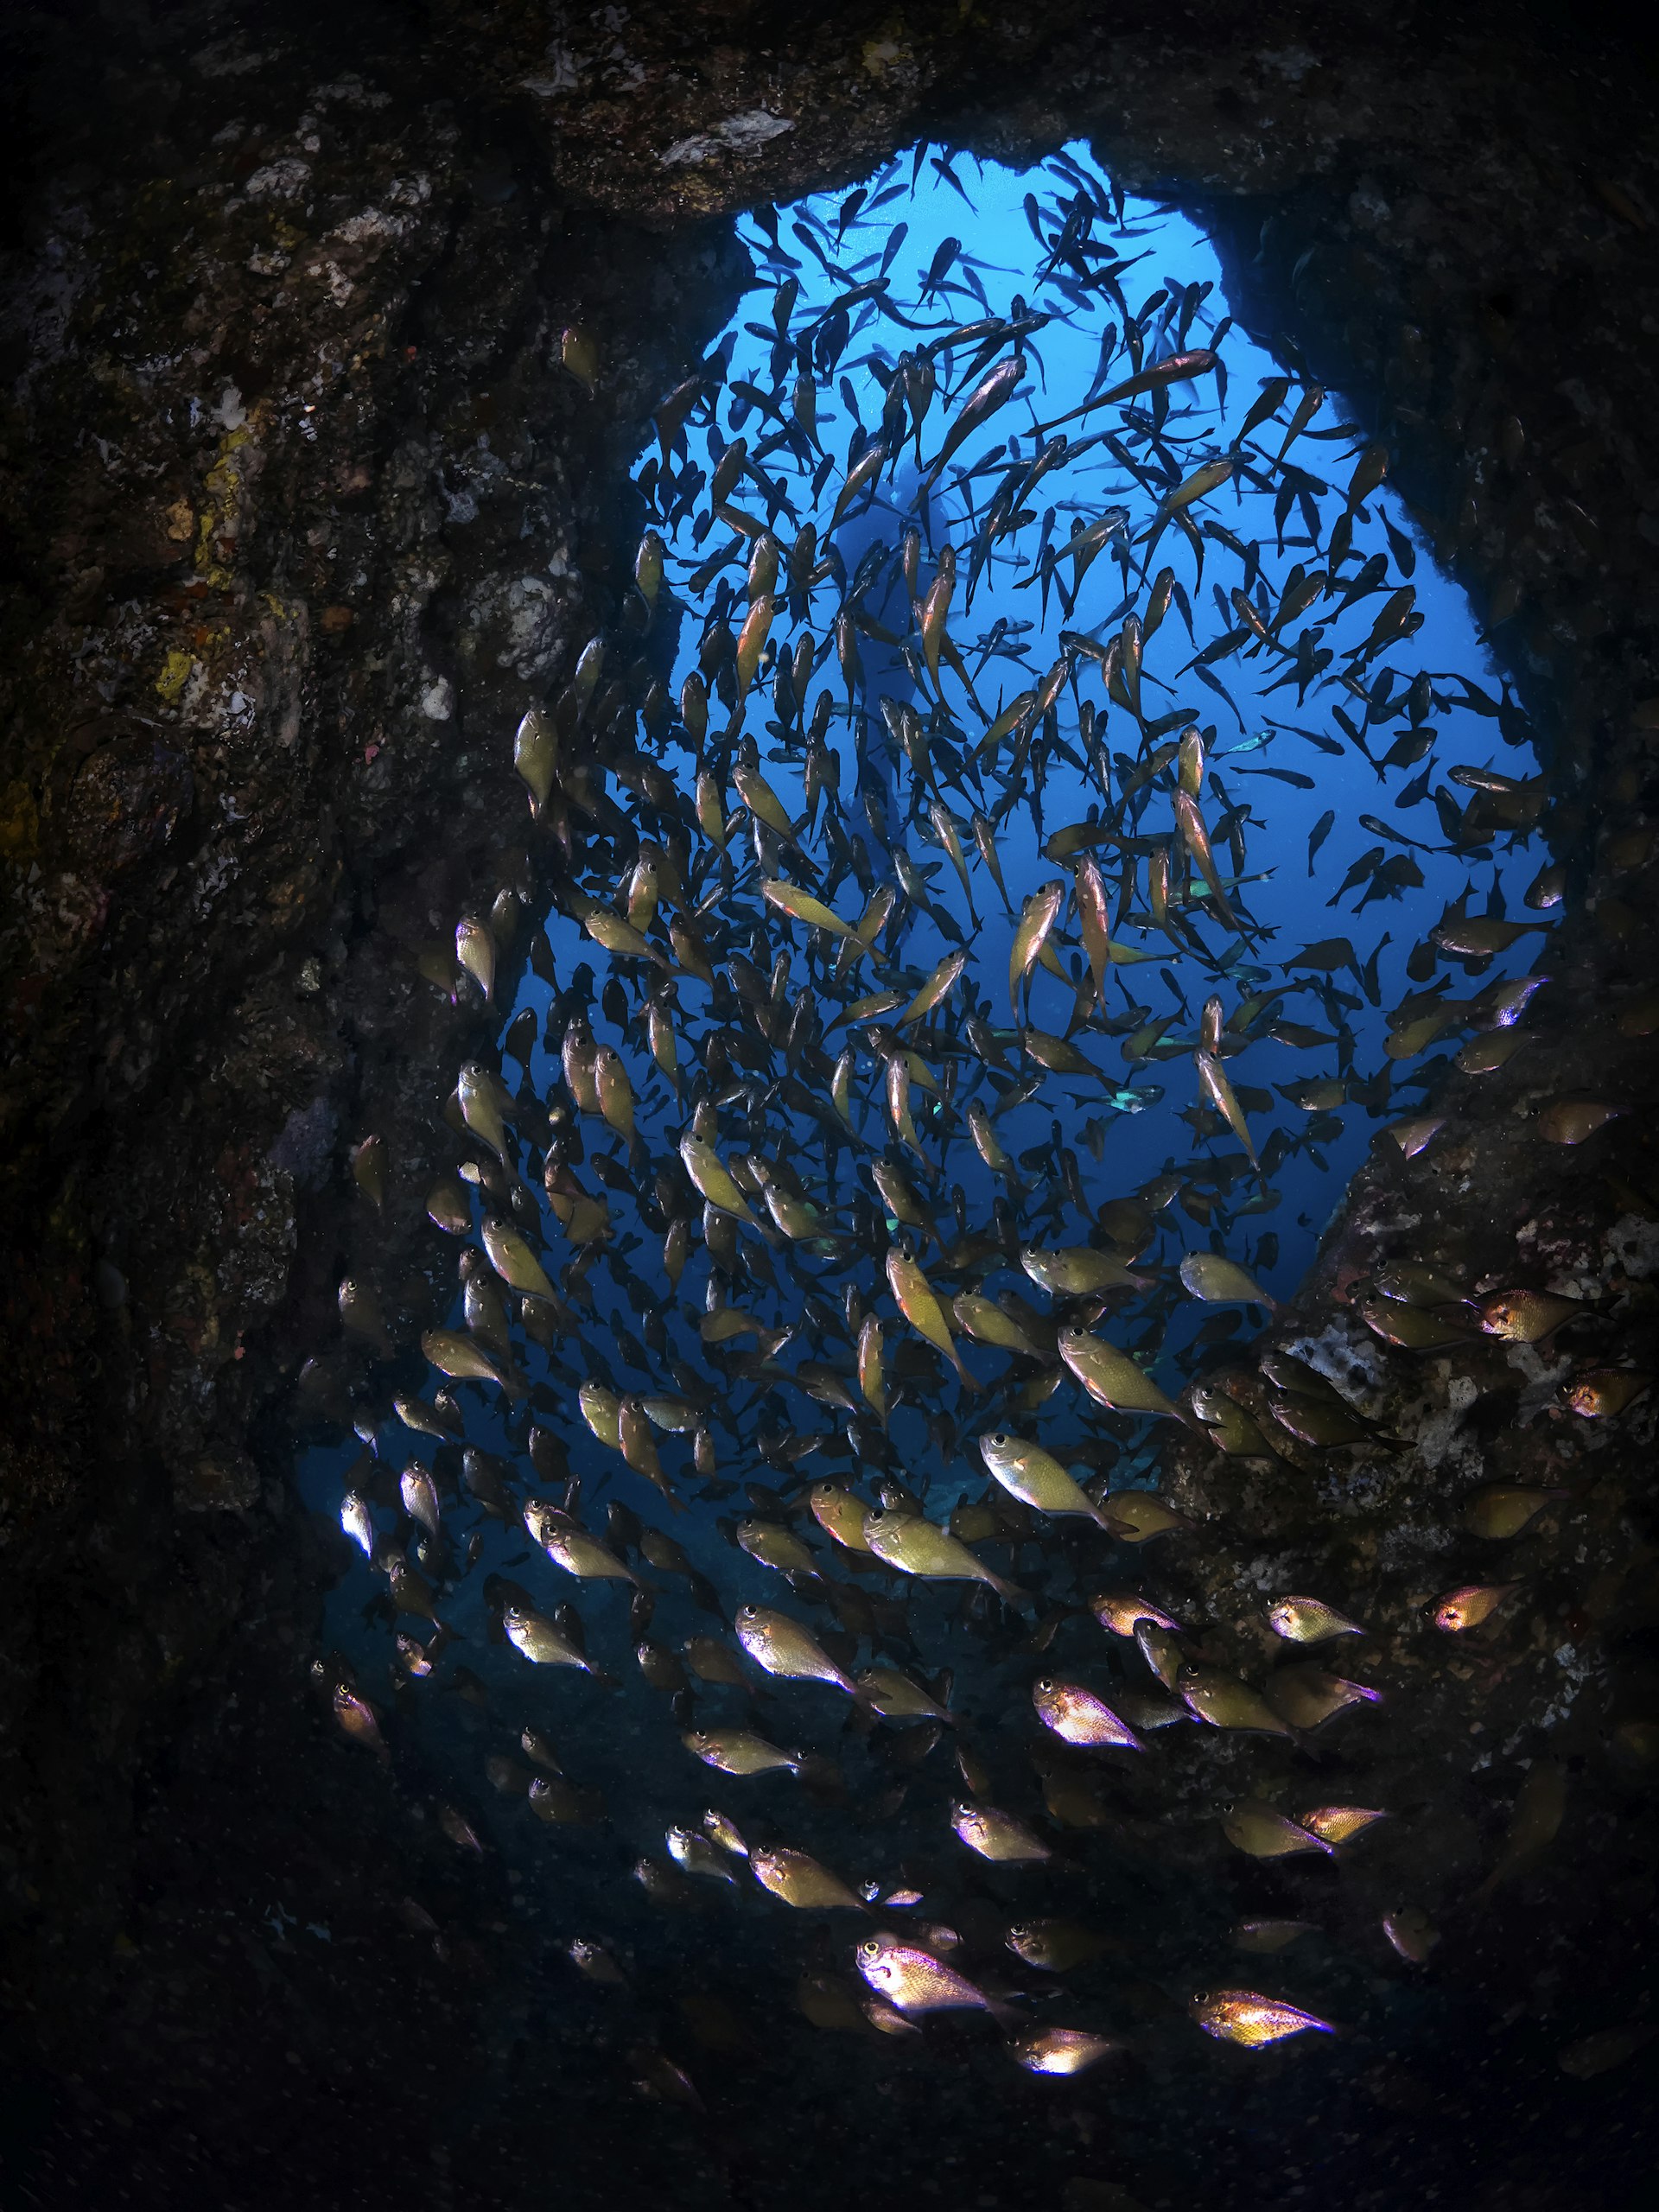 Features - Swirling school of fish inside a cave